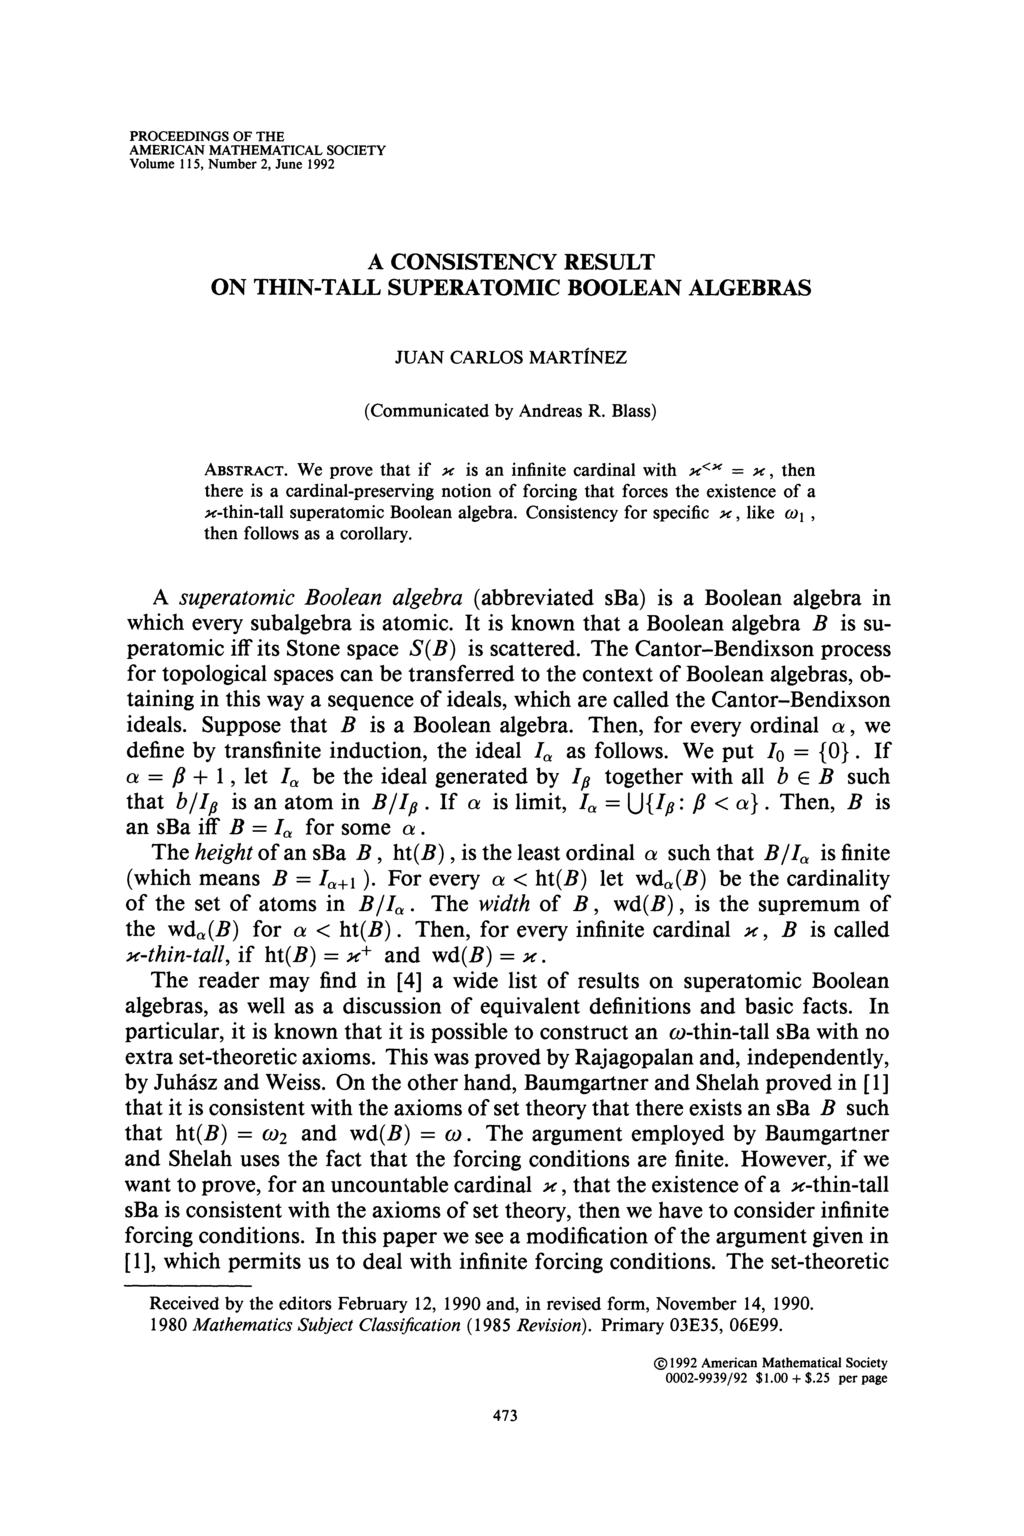 PROCEEDINGS OF THE AMERICAN MATHEMATICAL SOCIETY Volume 115, Number 2, June 1992 A CONSISTENCY RESULT ON THIN-TALL SUPERATOMIC BOOLEAN ALGEBRAS JUAN CARLOS MARTINEZ (Communicated by Andreas R.